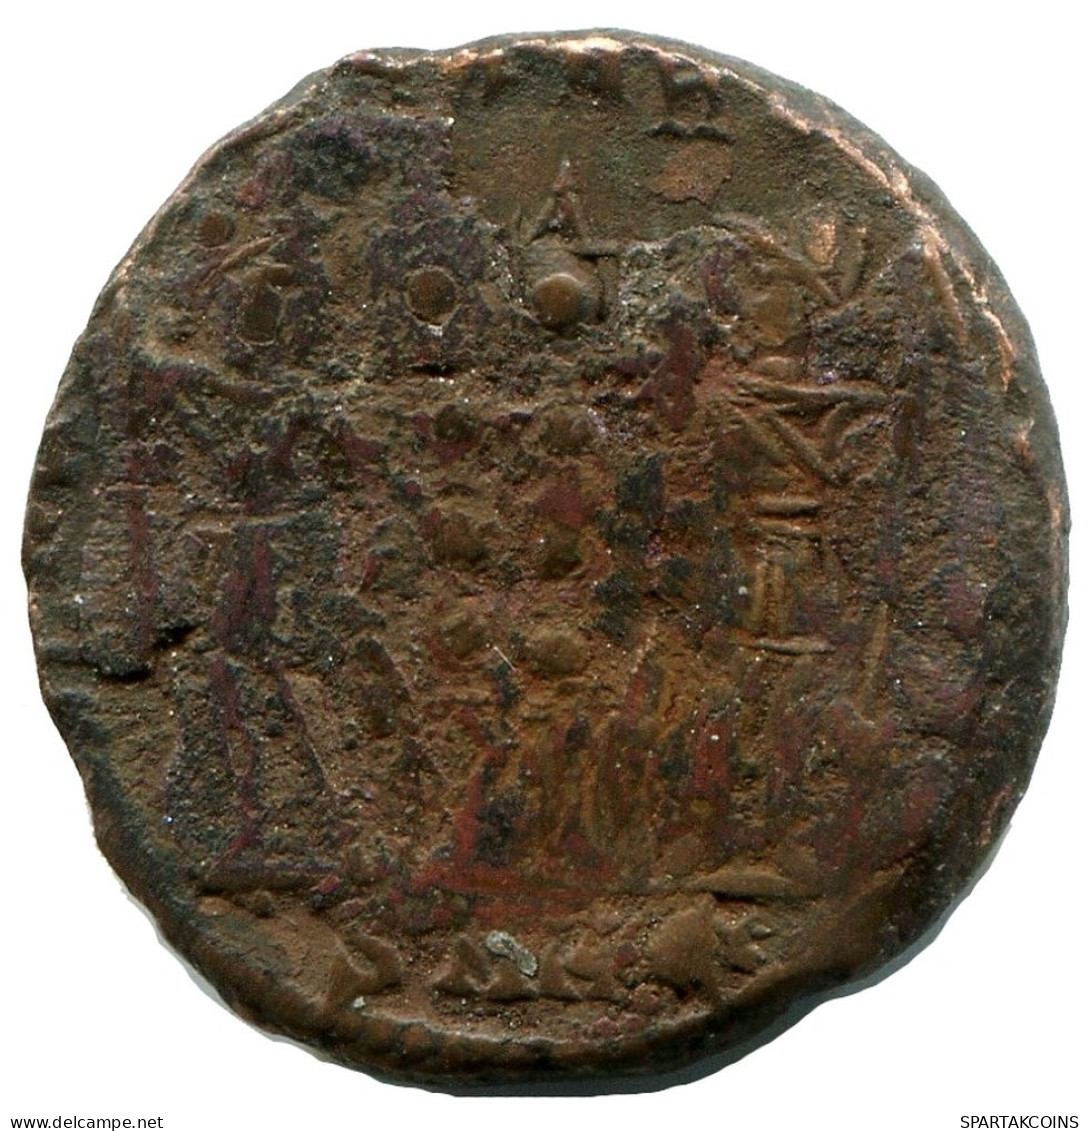 CONSTANTINE I MINTED IN HERACLEA FOUND IN IHNASYAH HOARD EGYPT #ANC11198.14.D.A - The Christian Empire (307 AD Tot 363 AD)